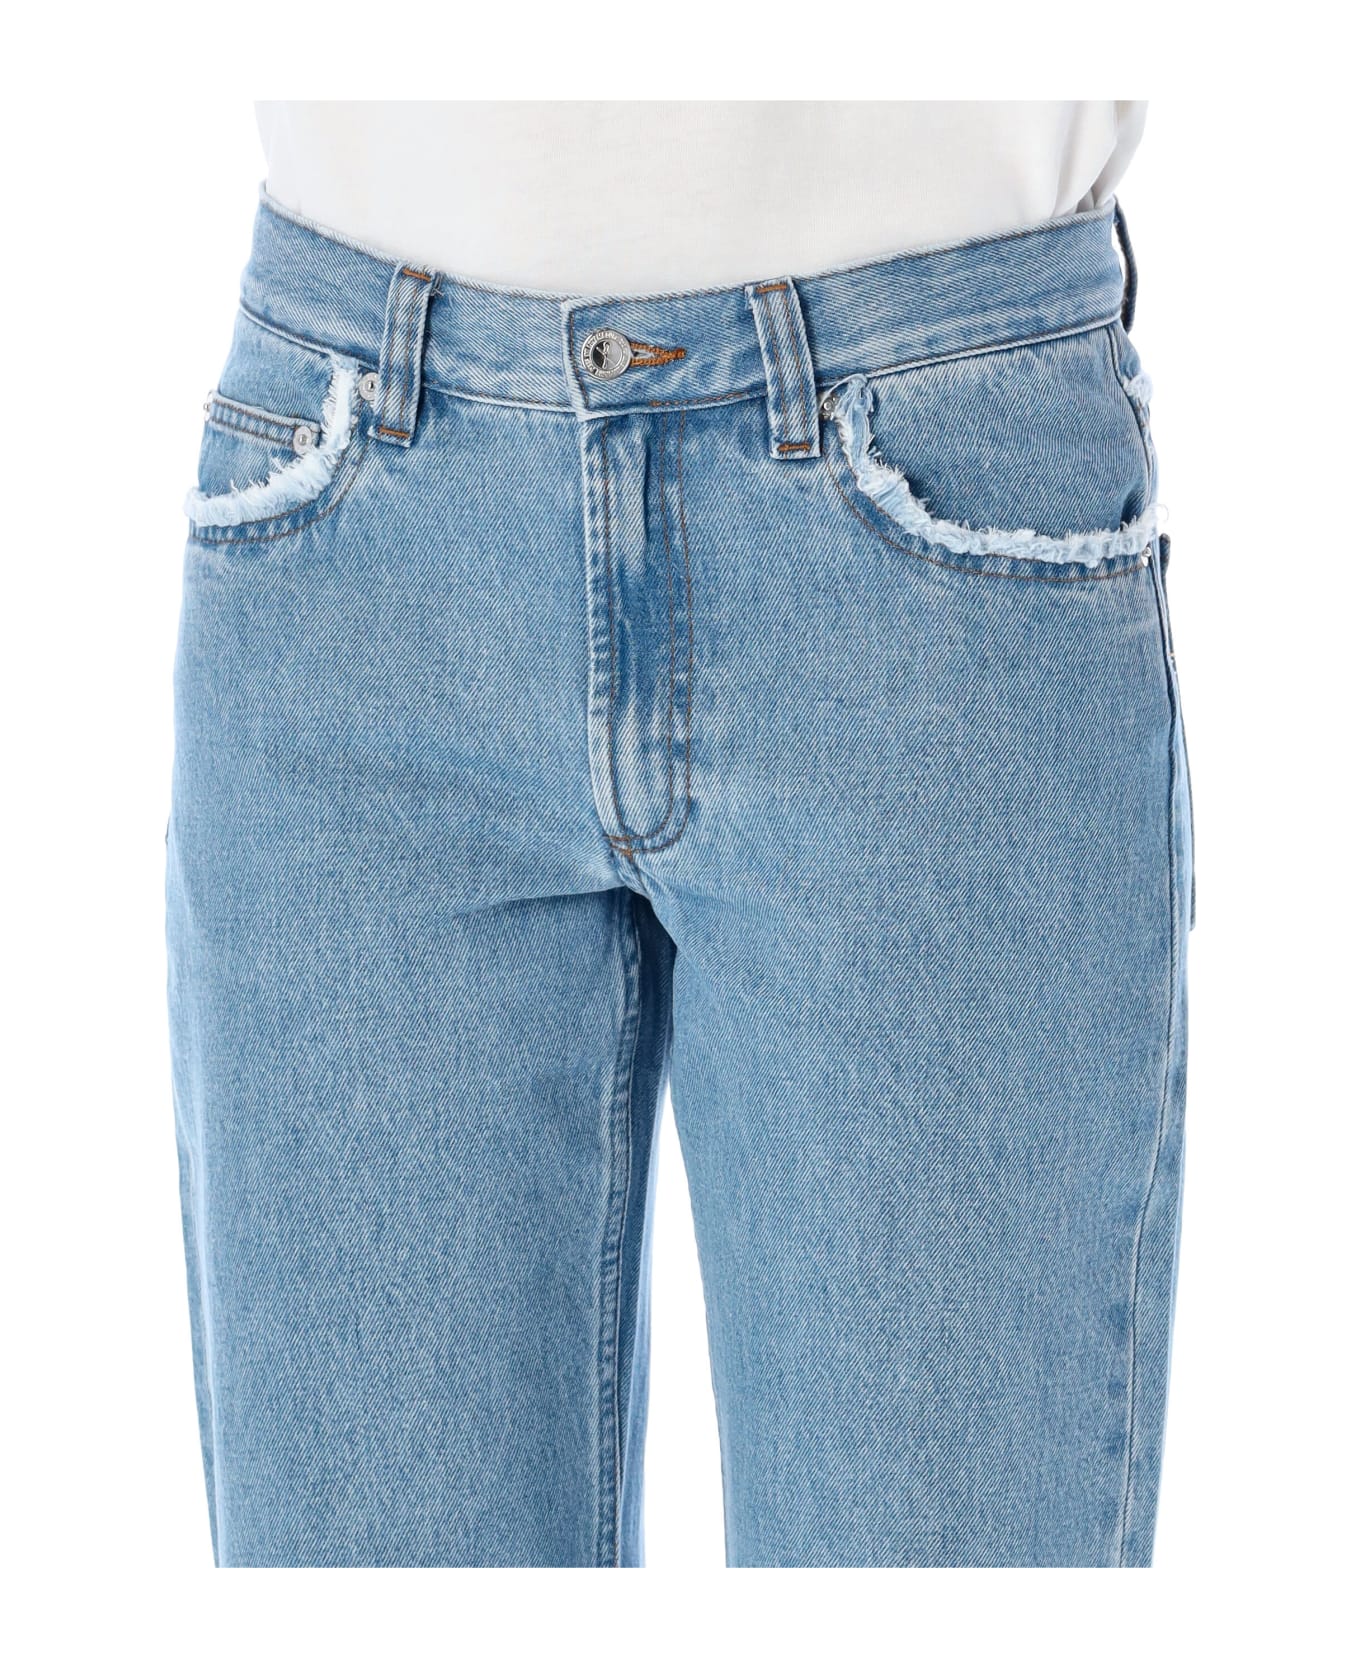 A.P.C. Relaxed Raw Edge Jeans - LIGHT BLUE デニム